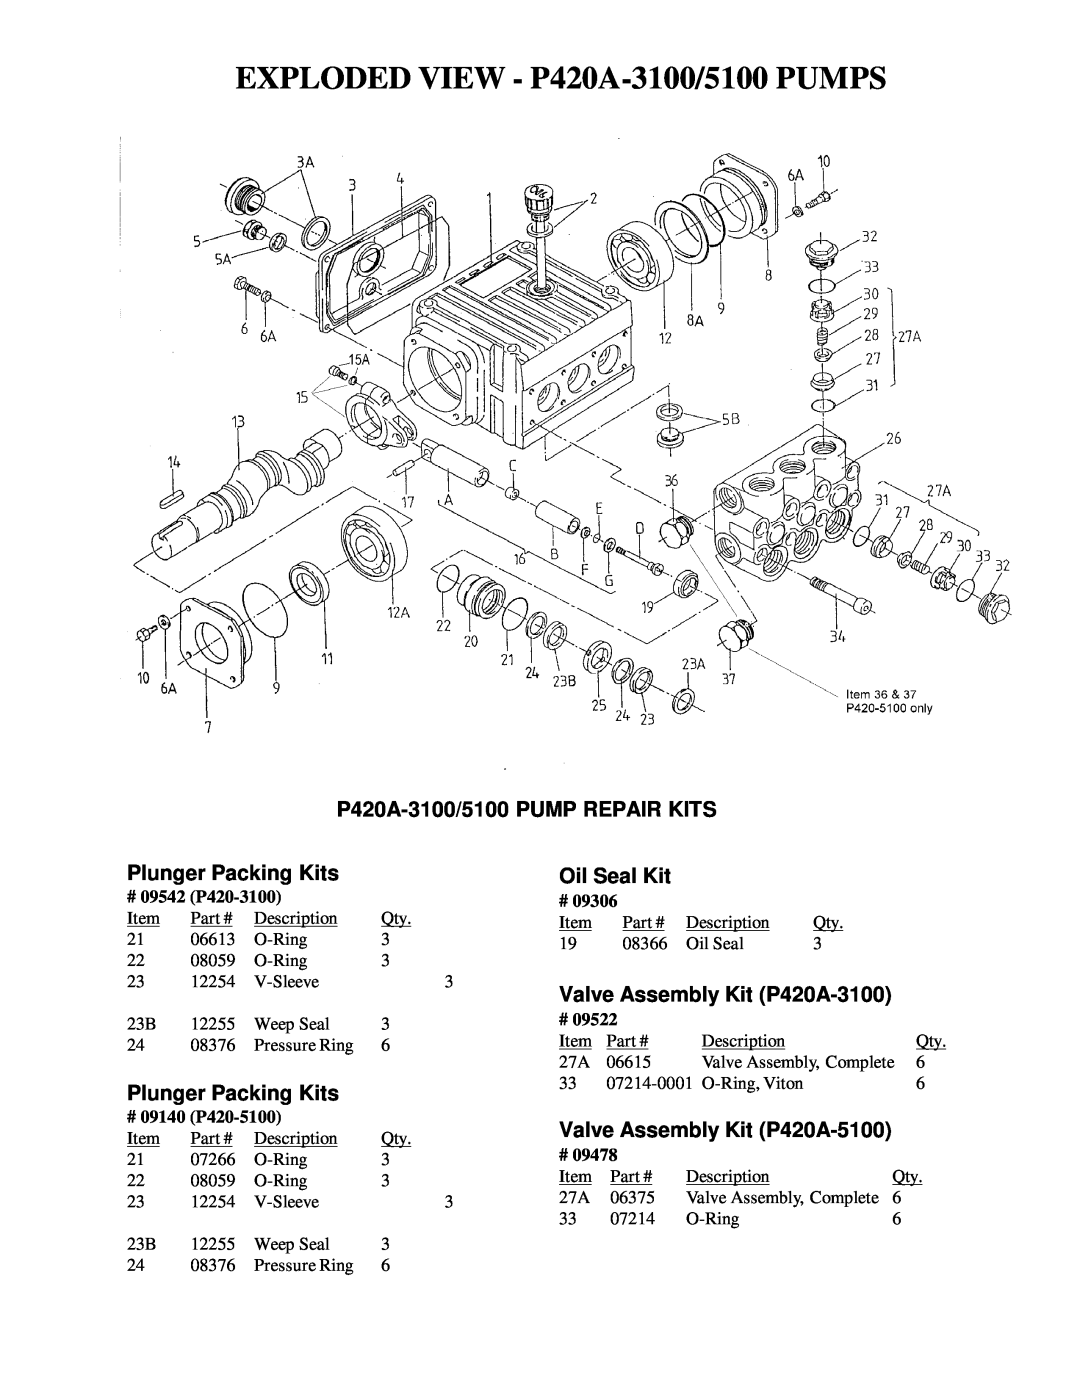 Giant P420A-3100/5100 PUMP REPAIR KITS, Plunger Packing Kits, Oil Seal Kit, Valve Assembly Kit P420A-3100 